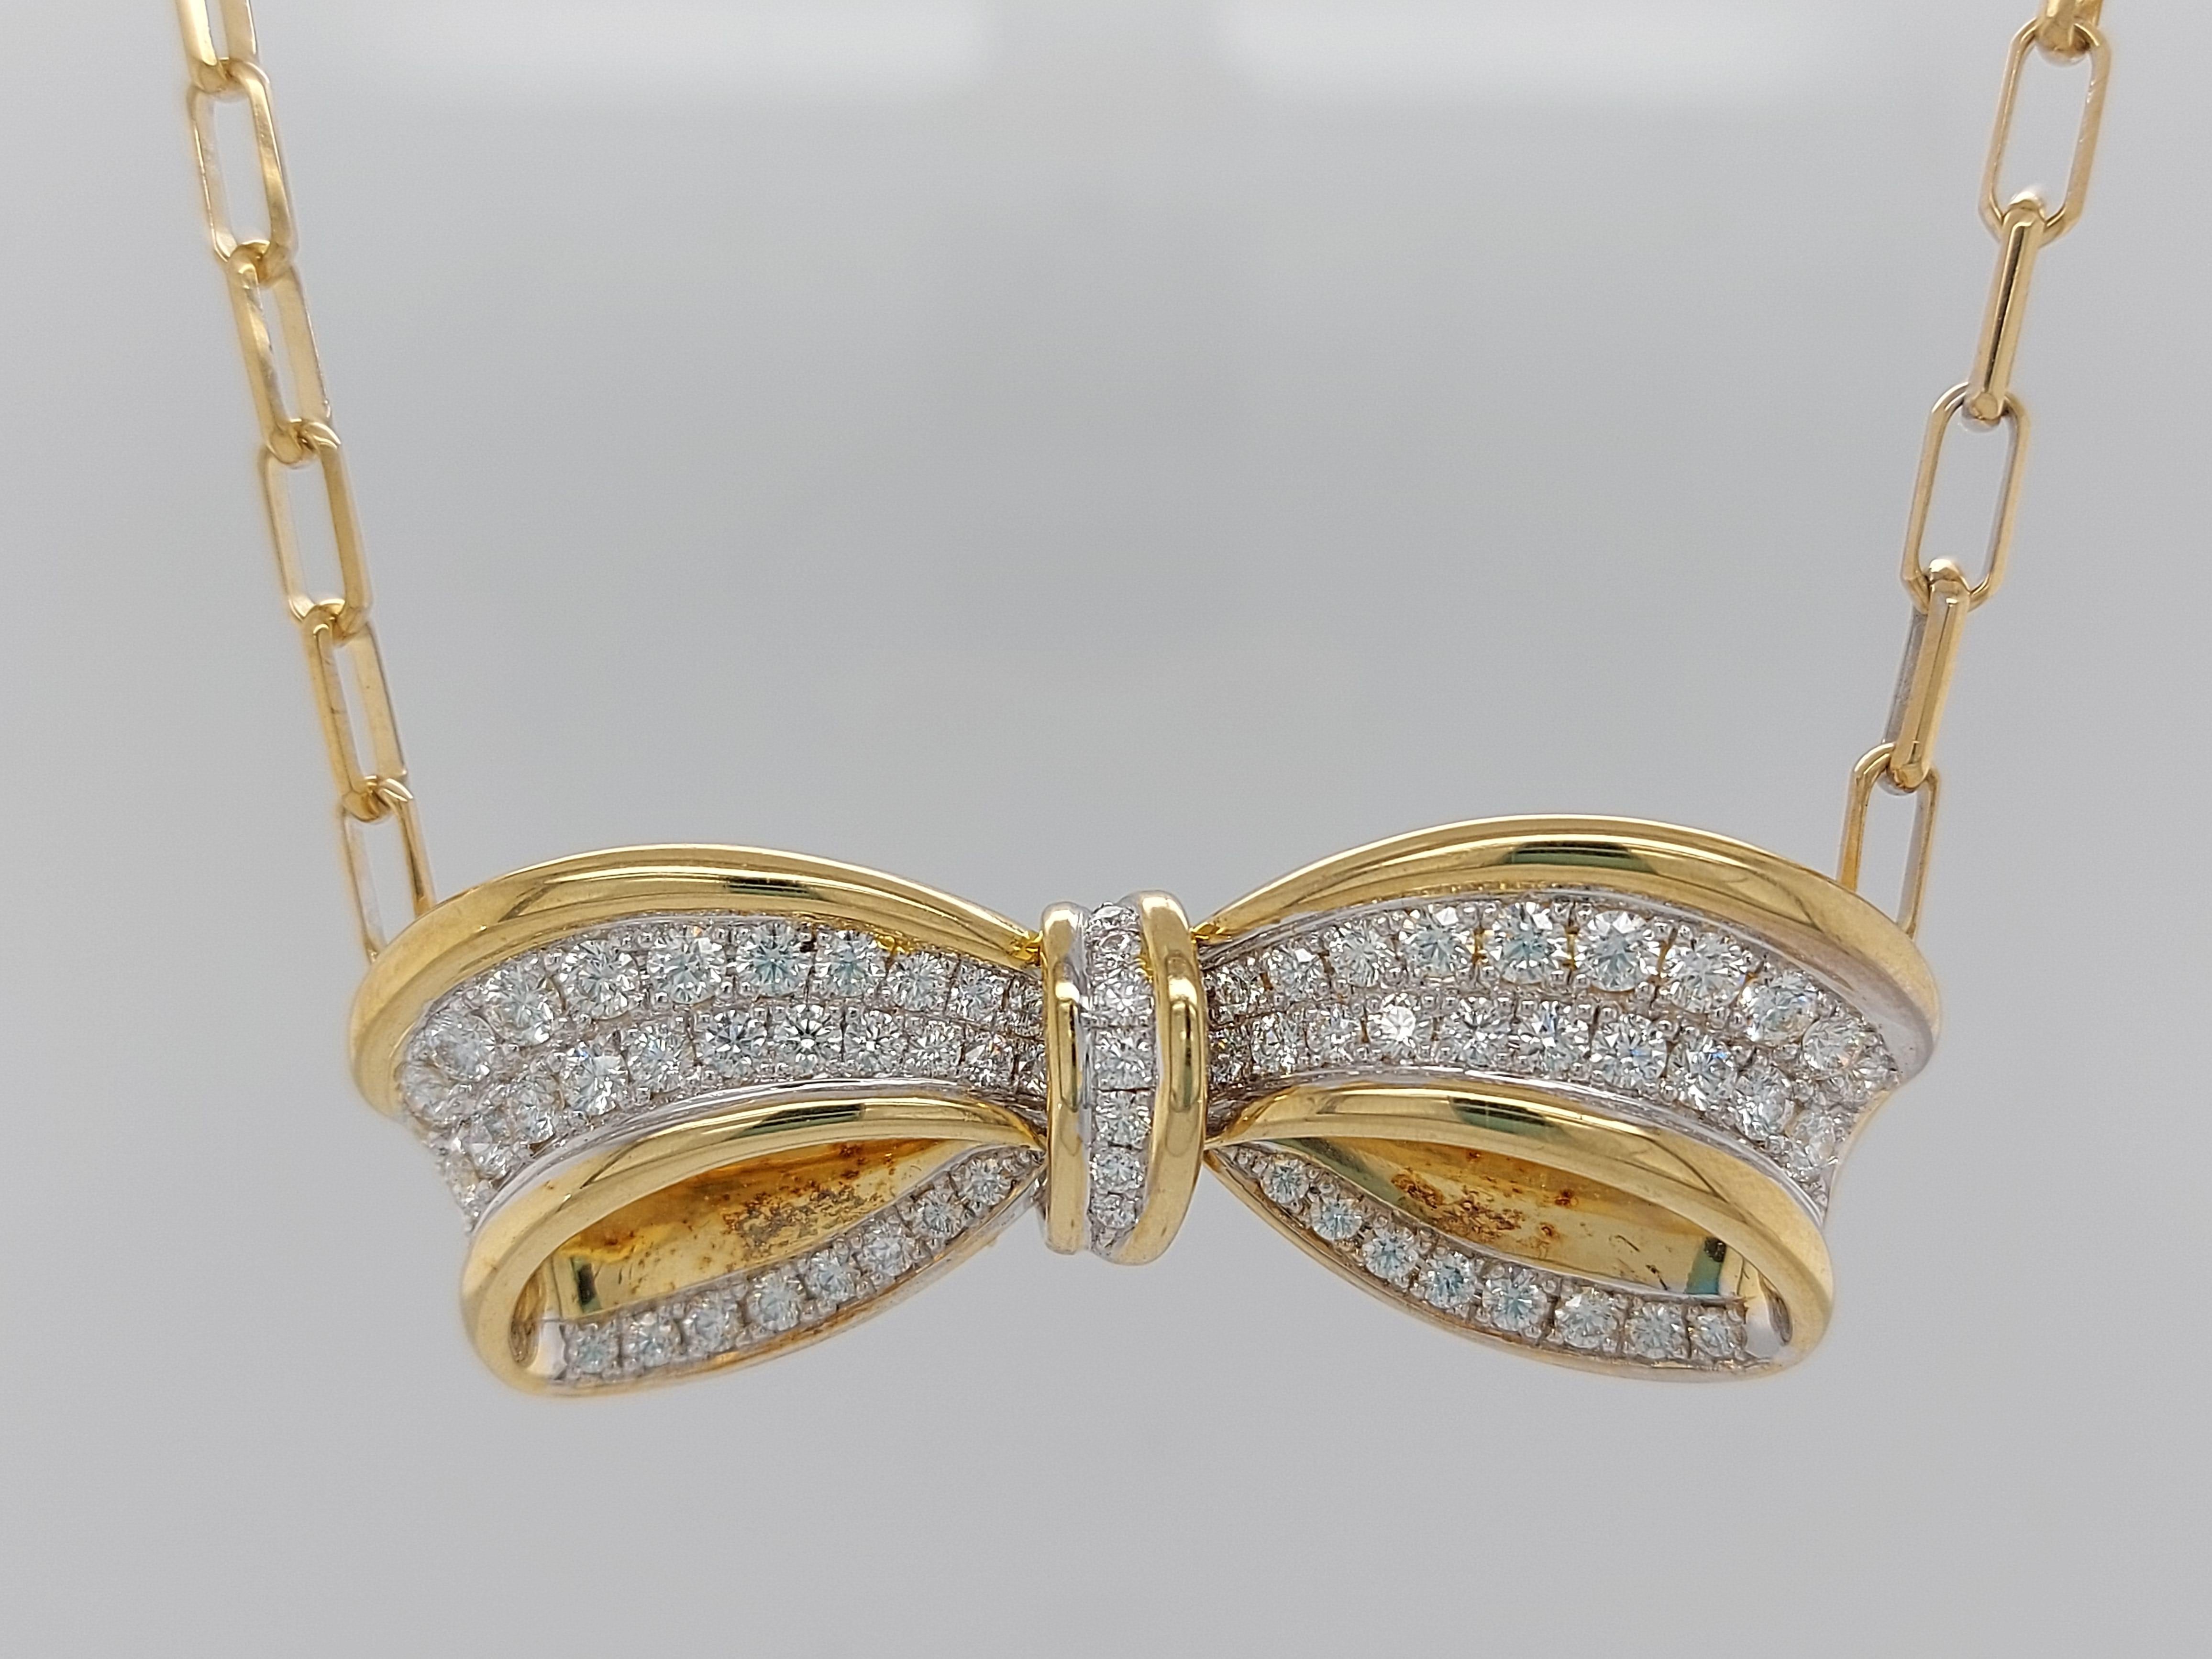 Stunning 18kt Solid Yellow and White Gold Bow Necklace With Diamonds 

Diamonds : Brilliant cut diamonds 2,05 ct top quality cut and color E/F Internally flawless/VVS

Material : 18kt solid yellow gold

Total Weight : 26.5 gram / 17 dwt / 0.930